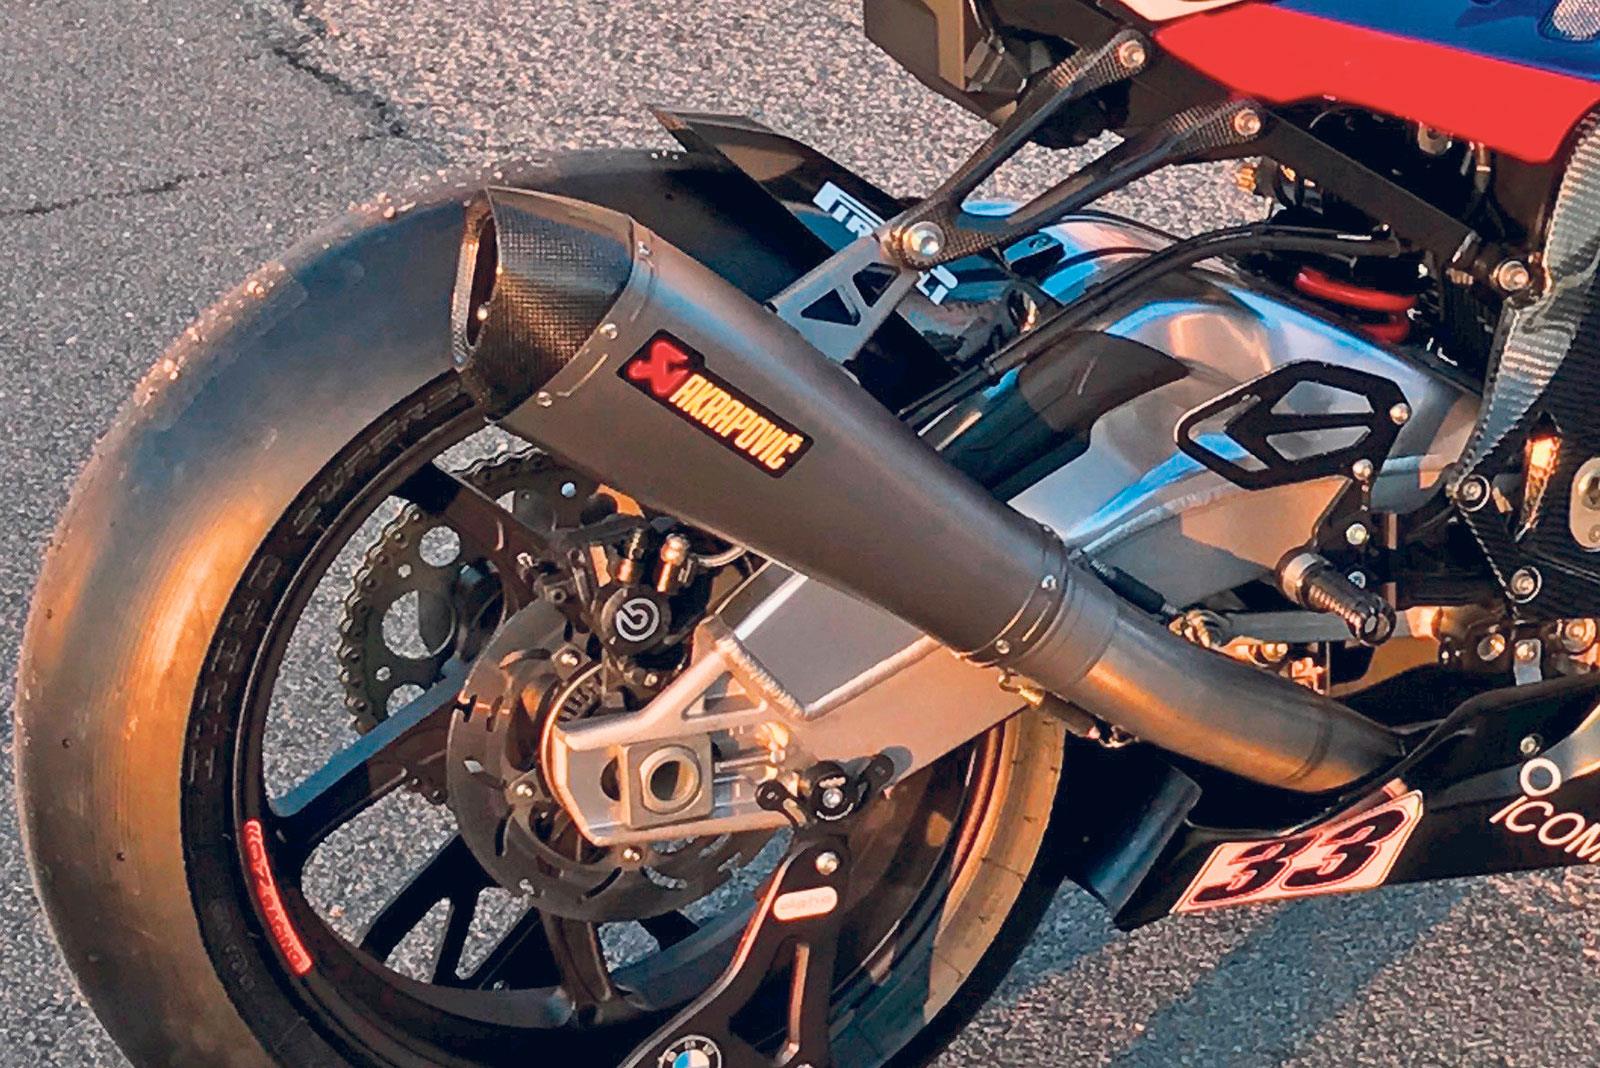 Product review: Akrapovic 4-2-1 exhaust system | MCN